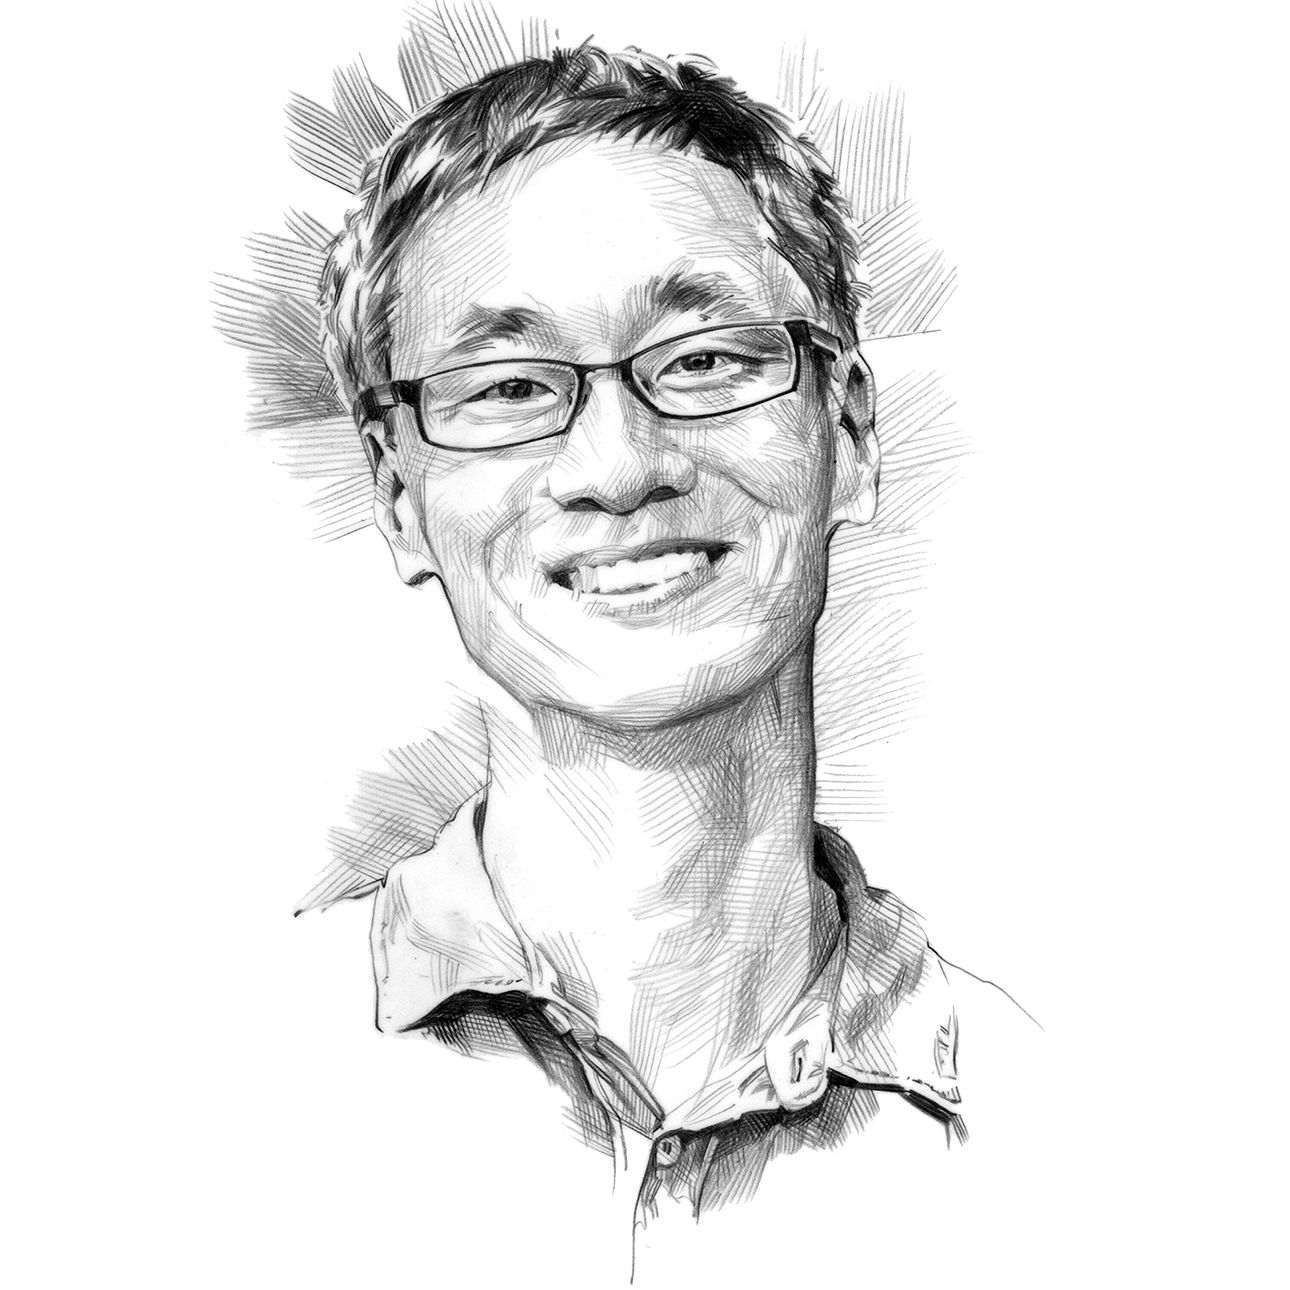 A black and white pencil-drawn illustration of Andrew Youn wearing rectangular glasses and smiling at the viewer.